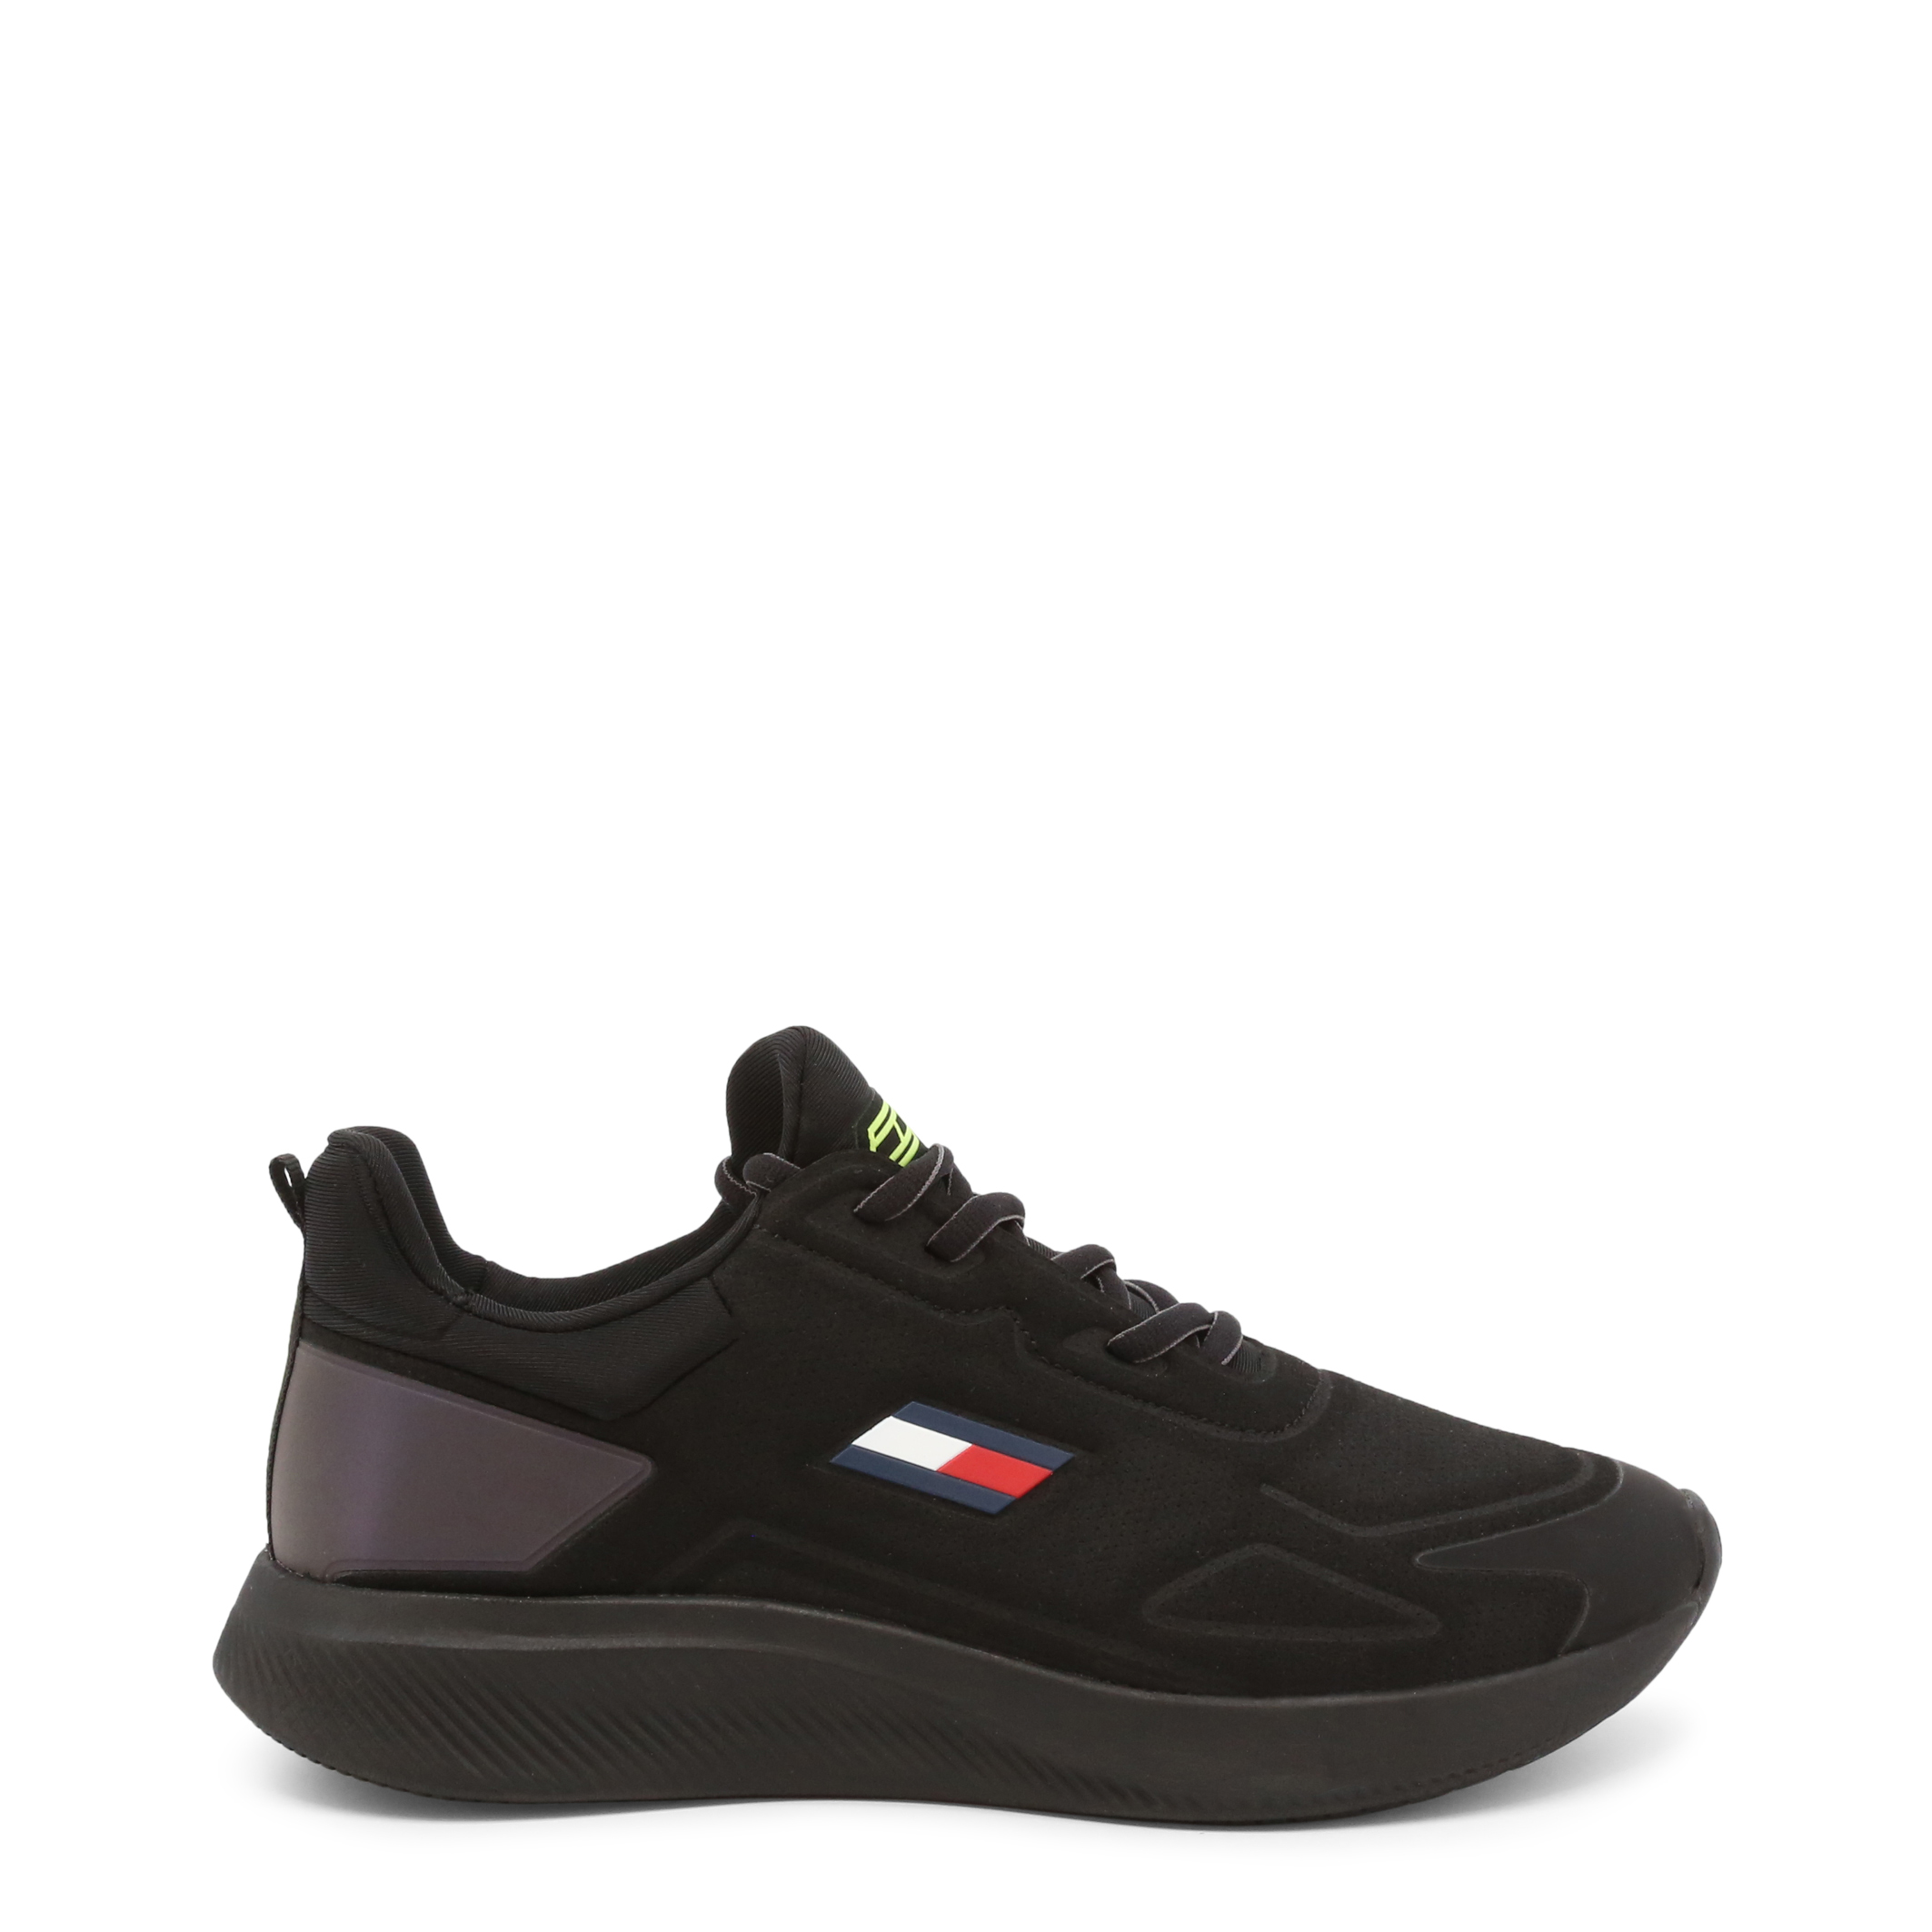 Tommy Hilfiger Black Sneakers for Women - FC0FC00023